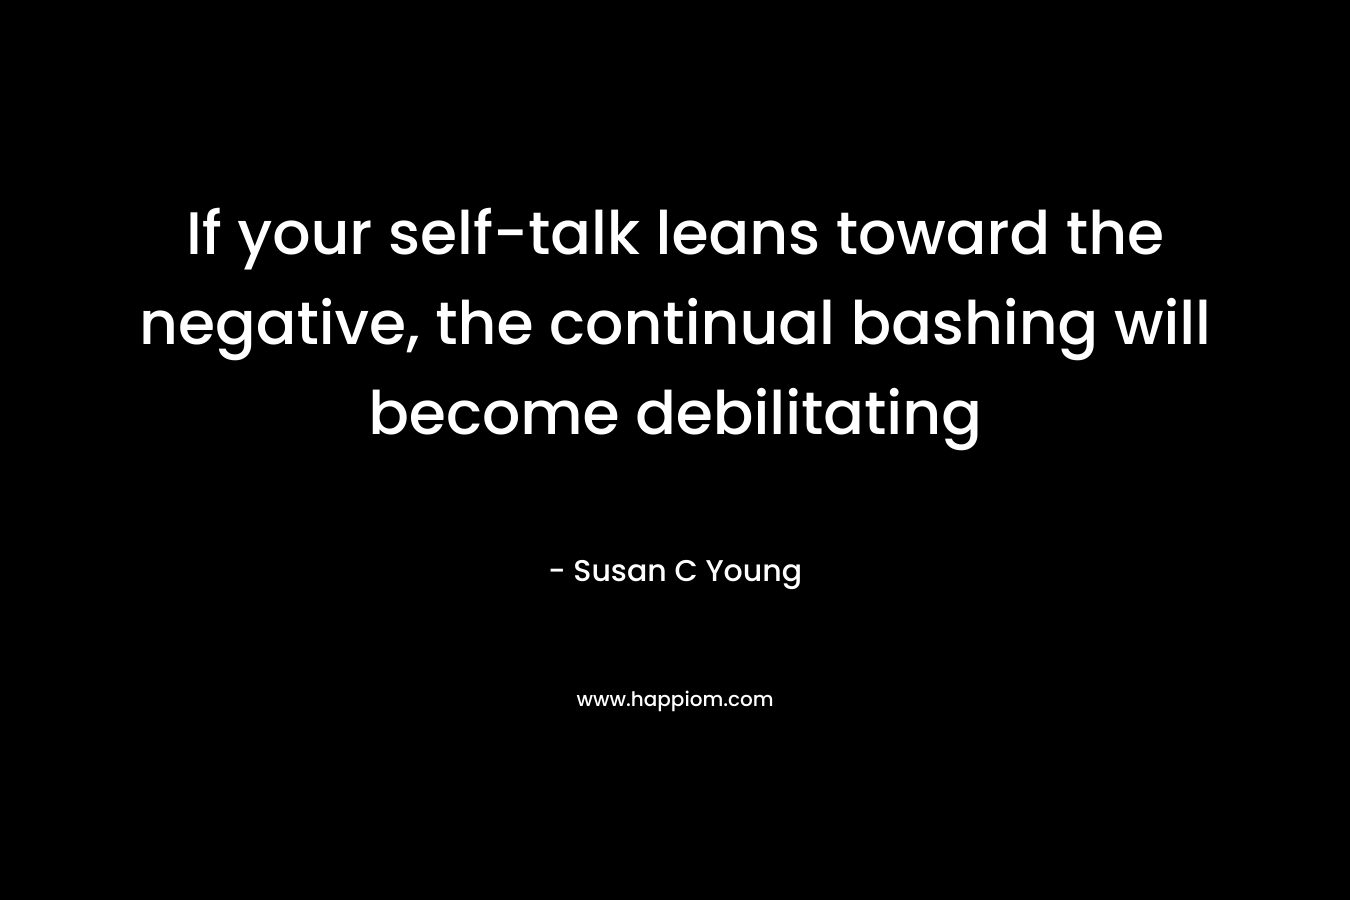 If your self-talk leans toward the negative, the continual bashing will become debilitating – Susan C Young